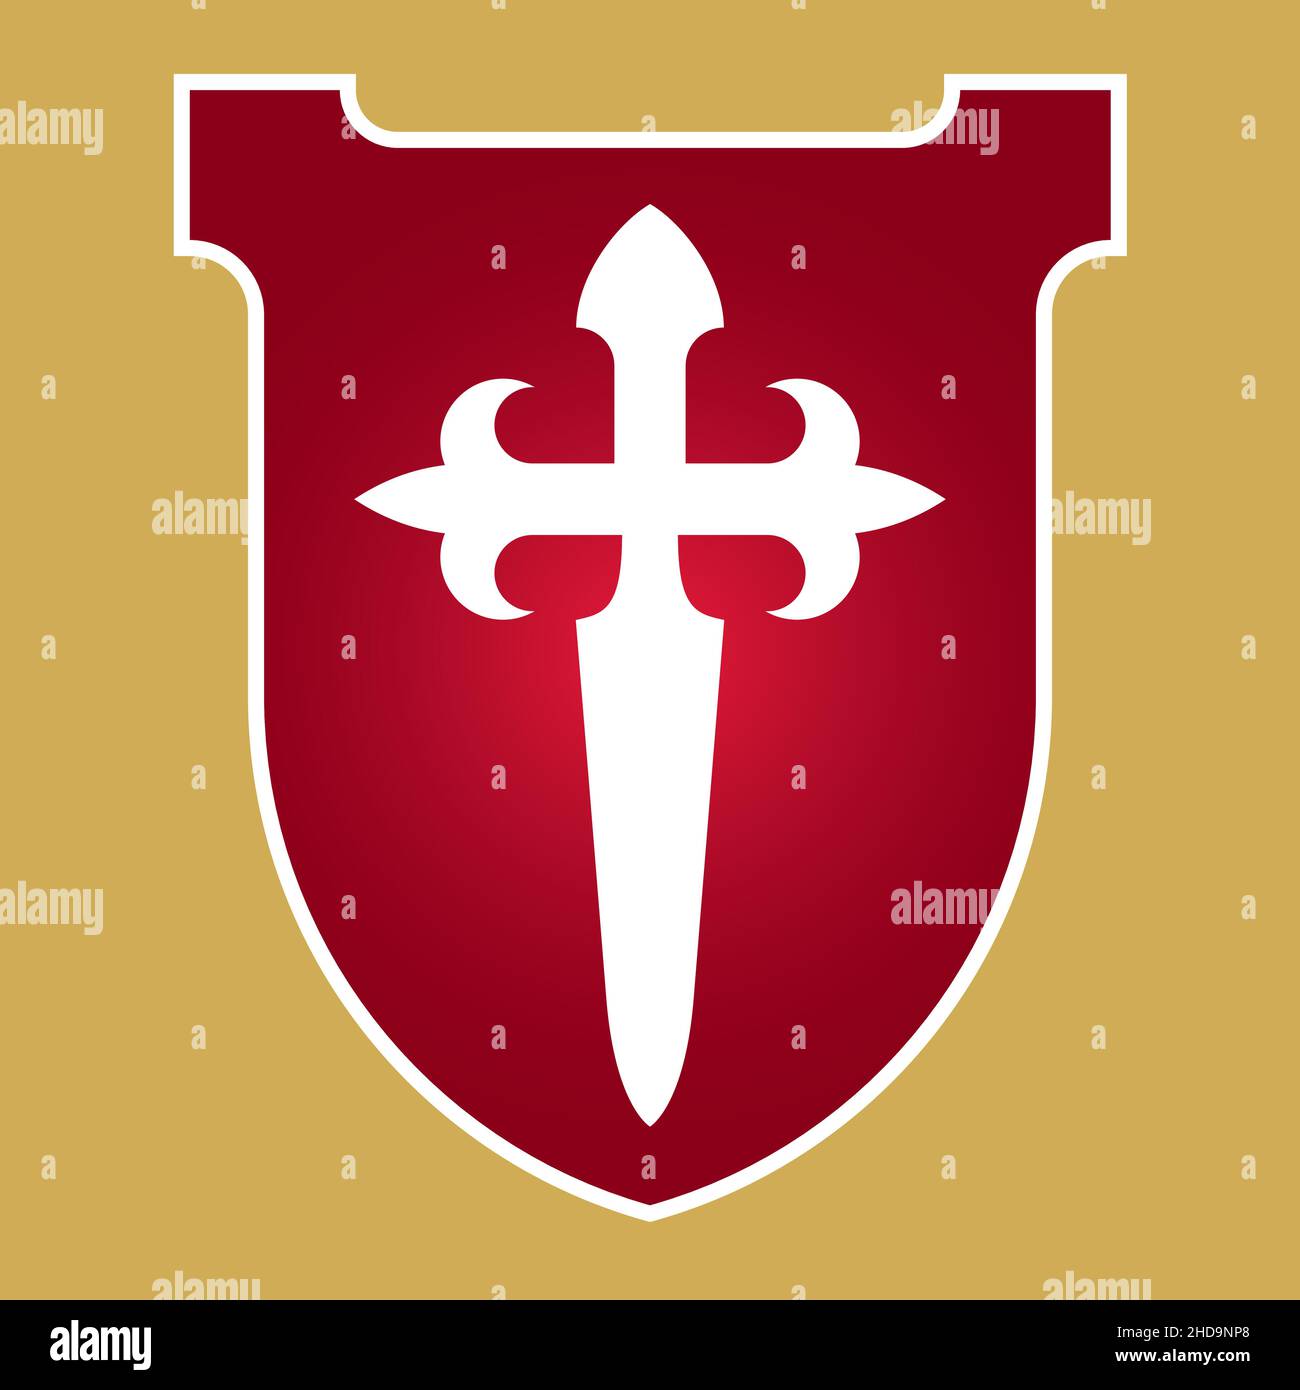 Cross of Saint James Christian badge or logo design. Vector illustration of St. James cross which forms a dagger or sword. Stock Vector